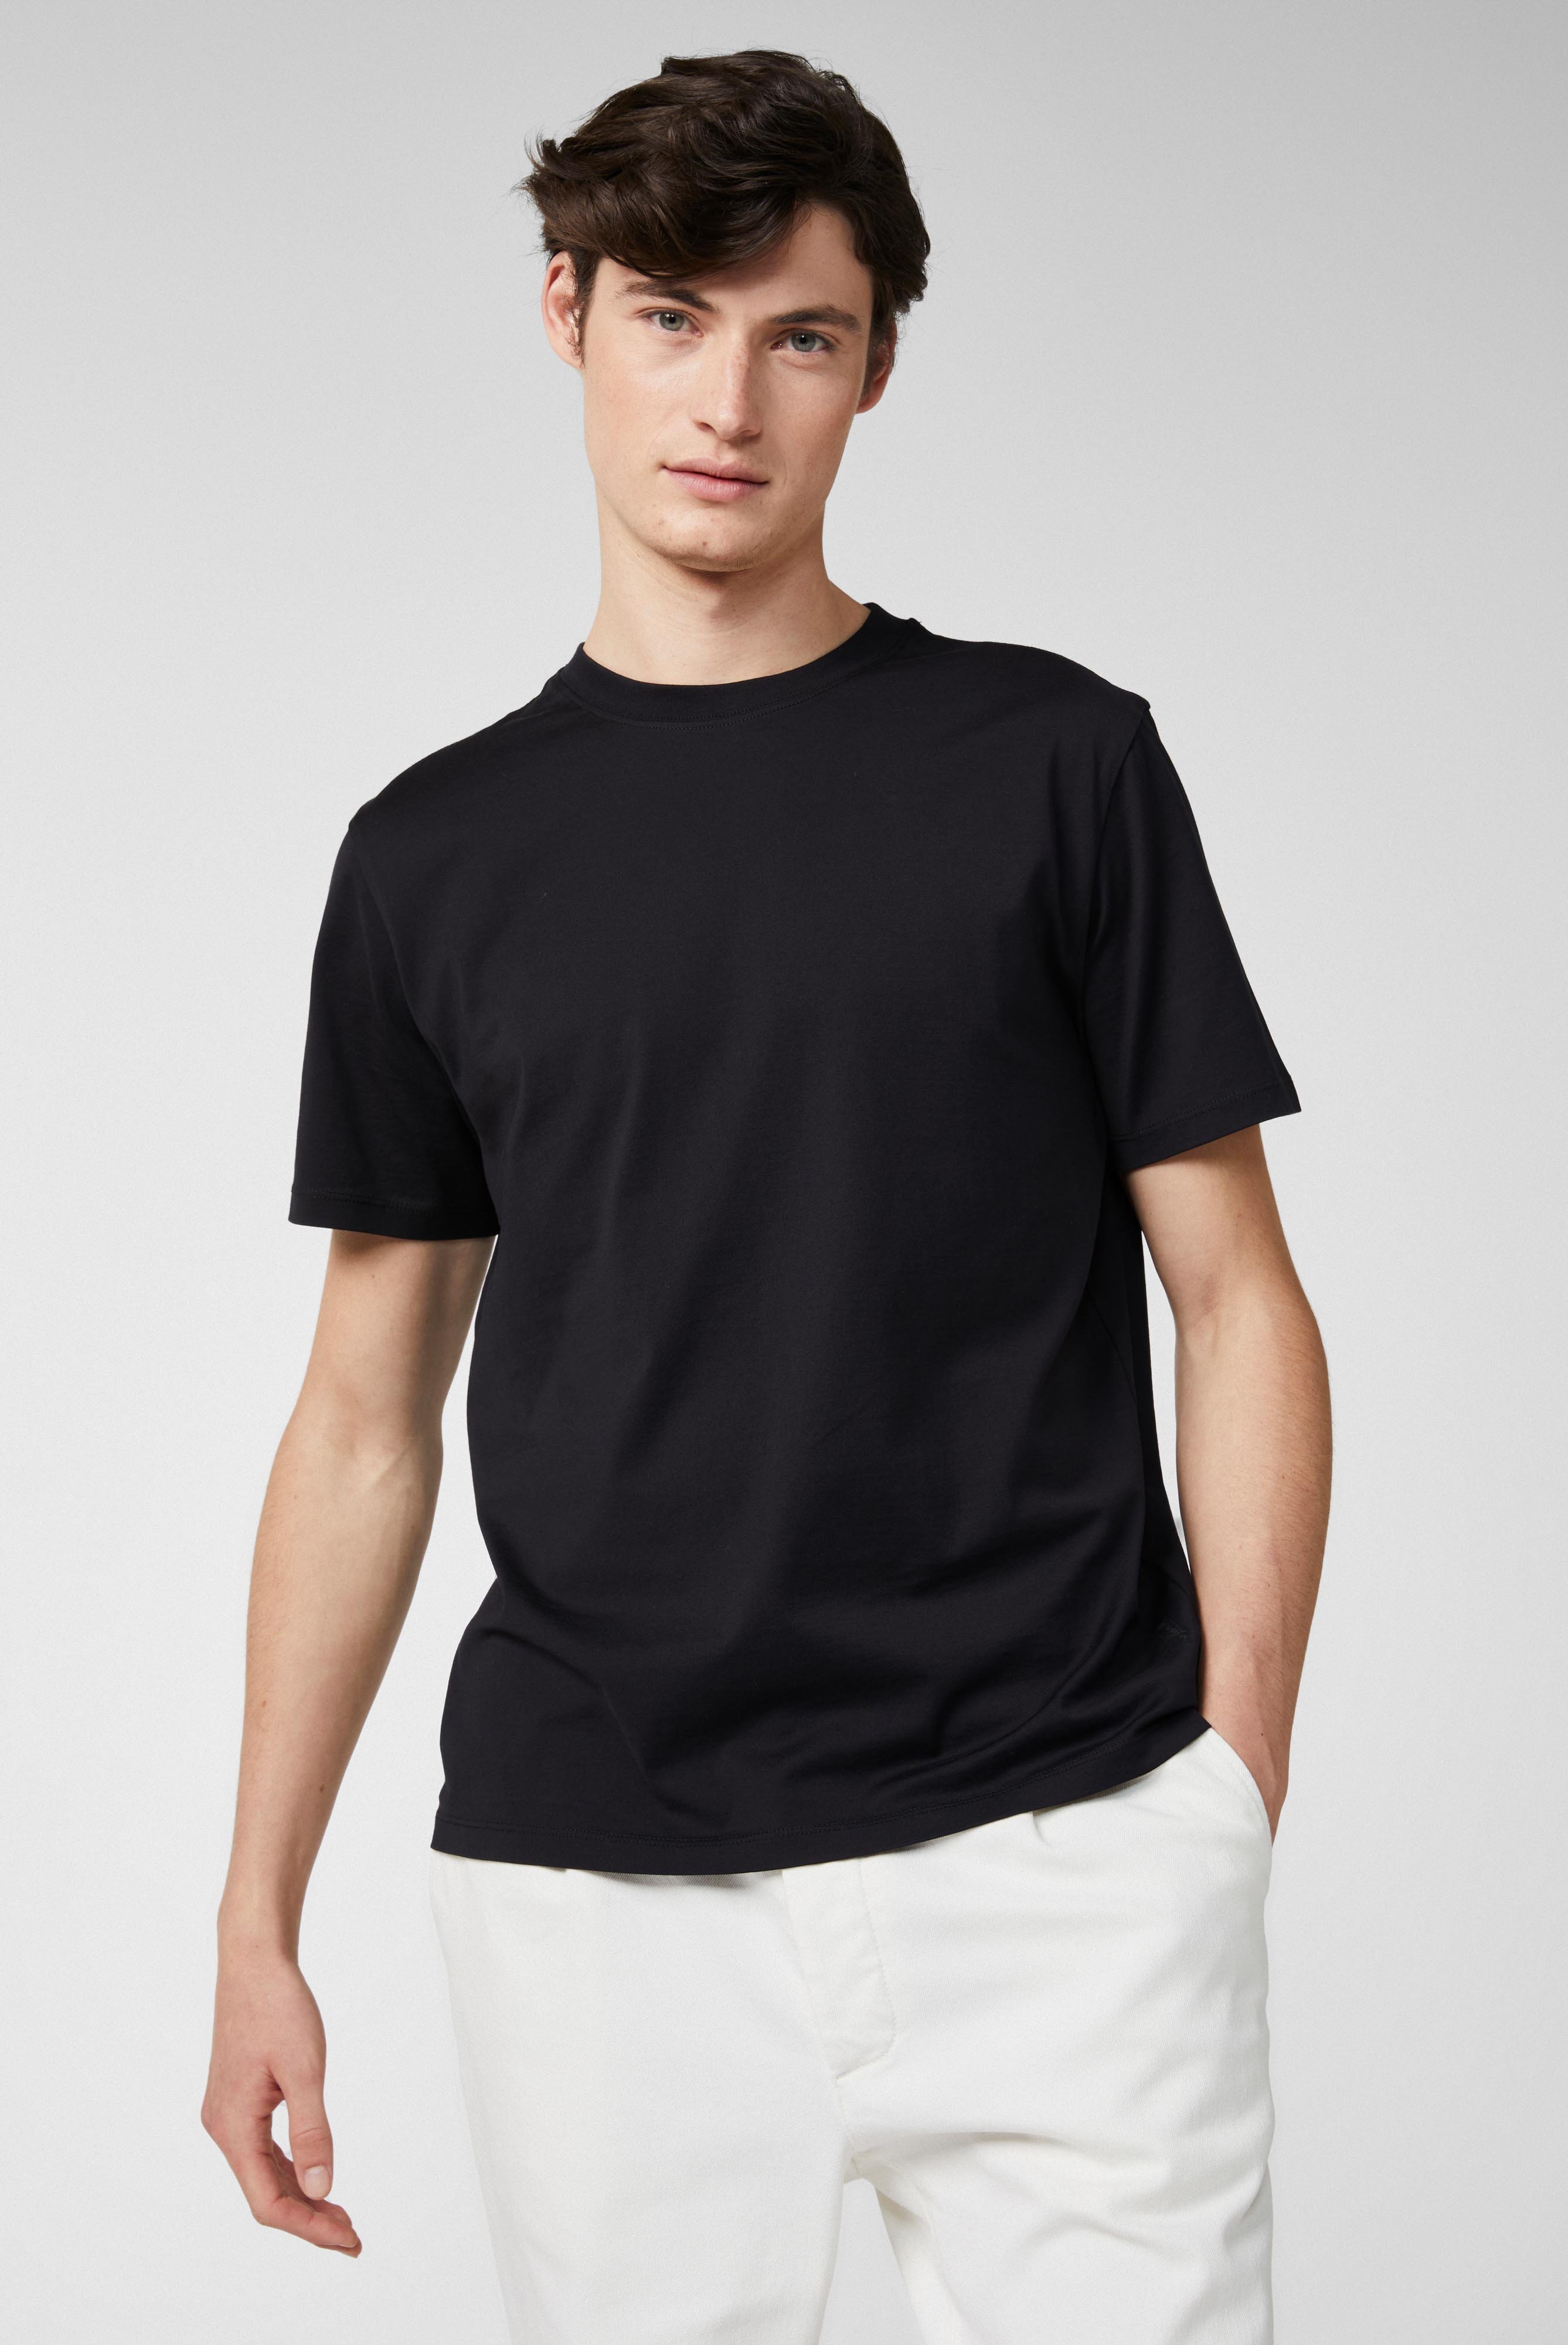 T-Shirts+Relaxed Fit Crew Neck Jersey T-Shirt+20.1660..Z20044.099.S